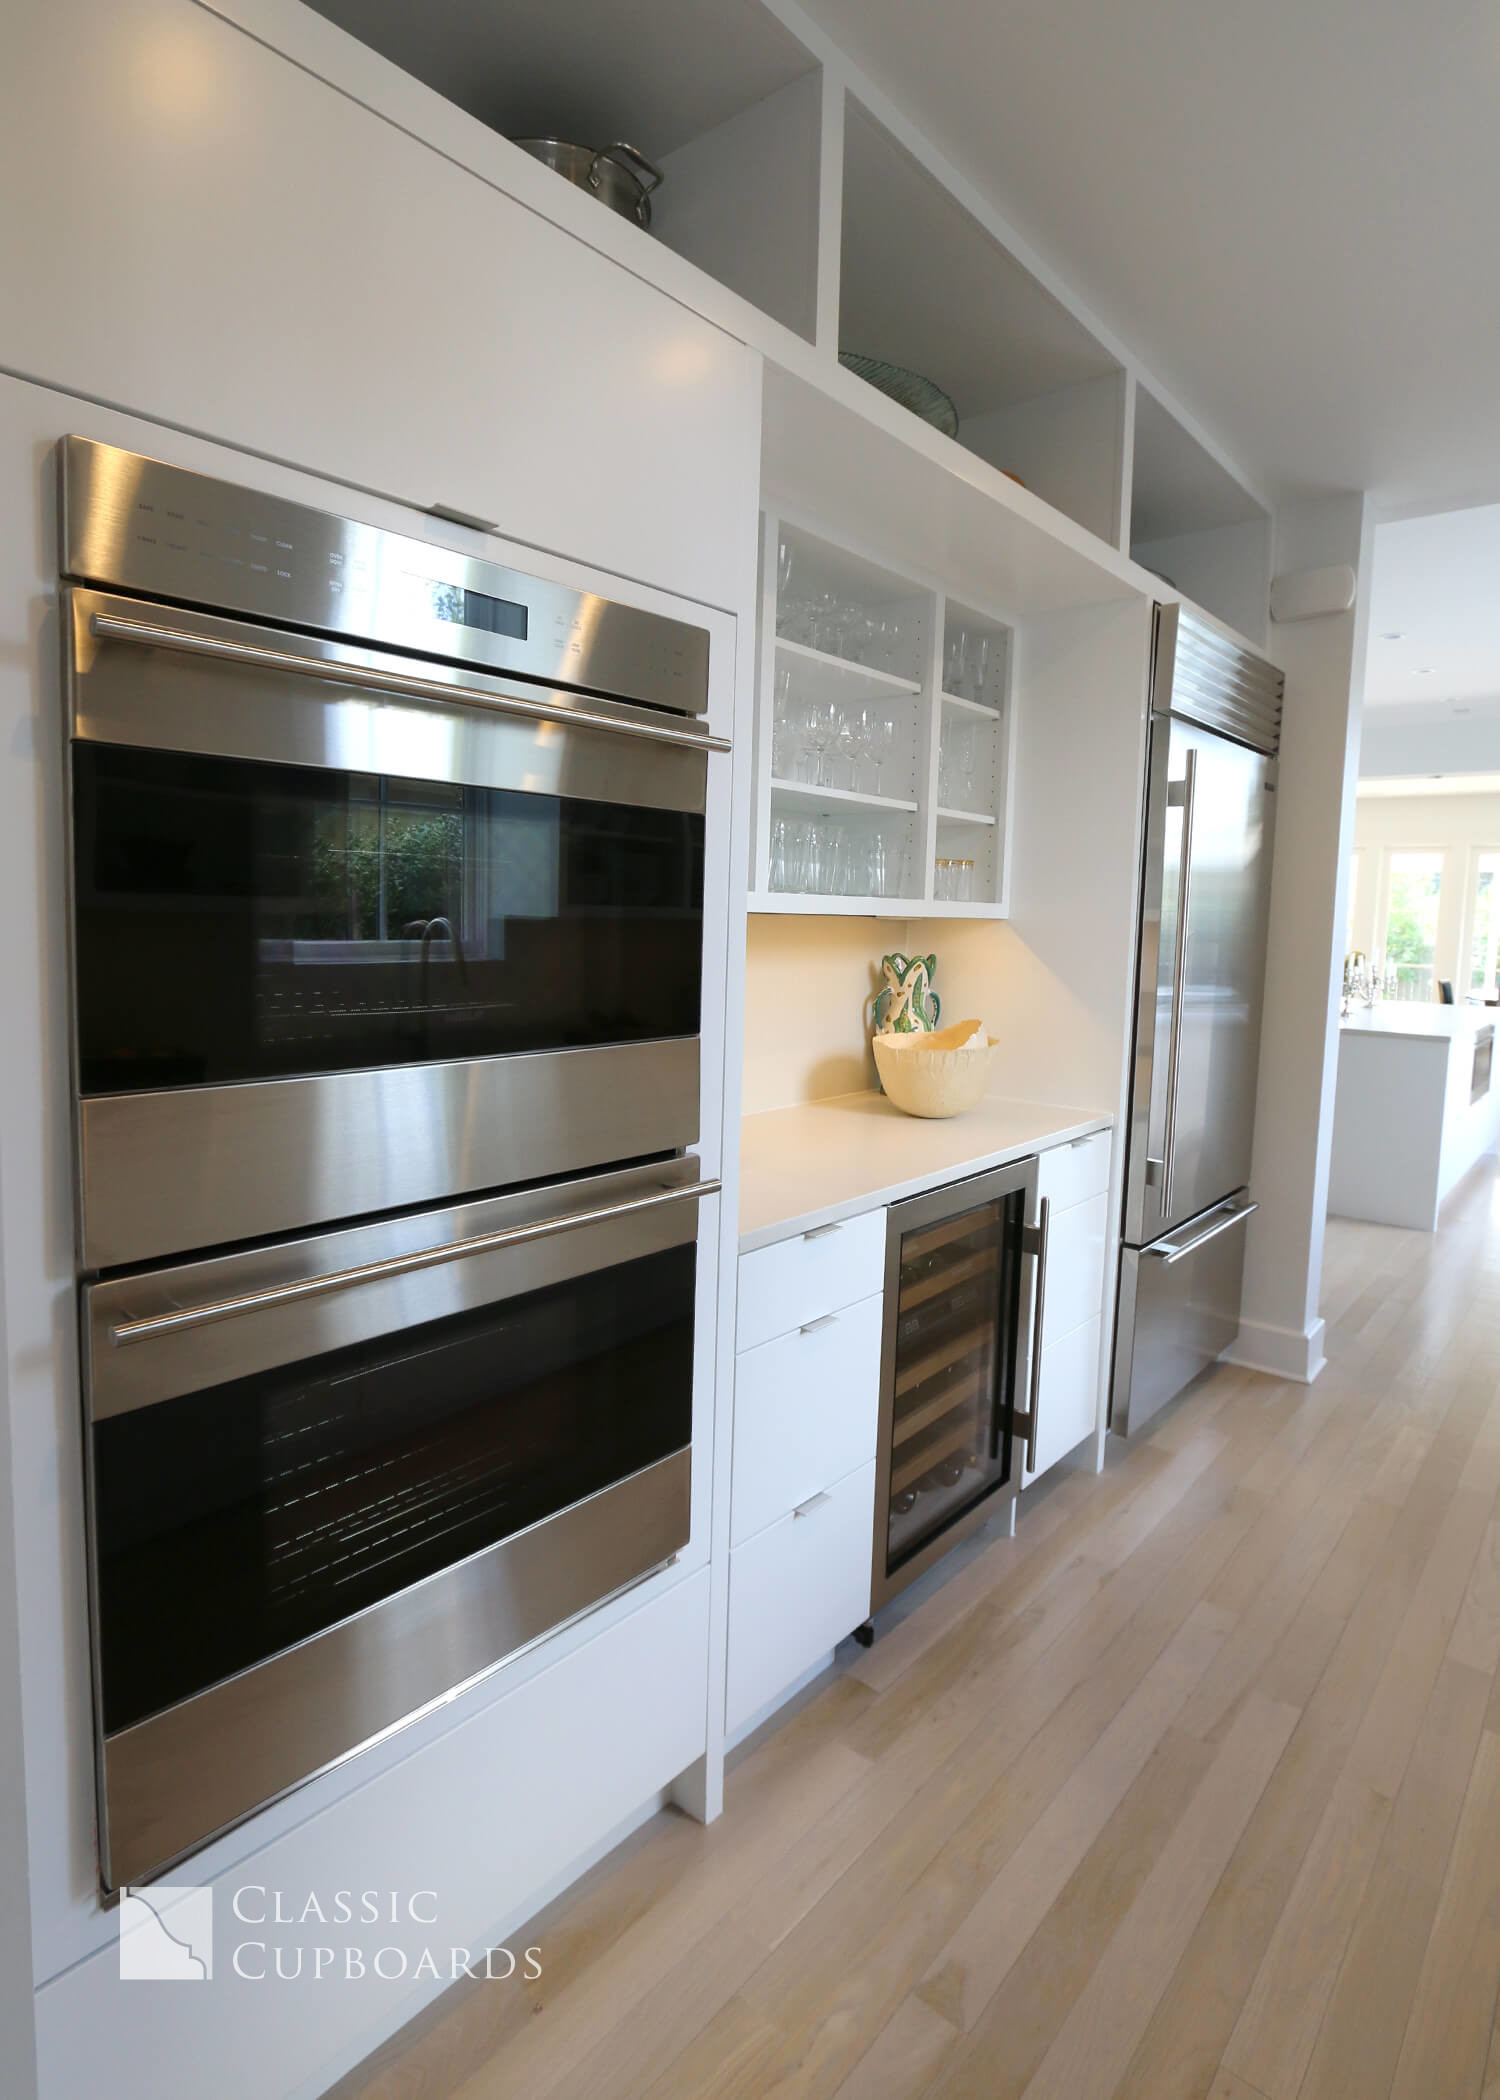 contemporary style kitchen with double ovens